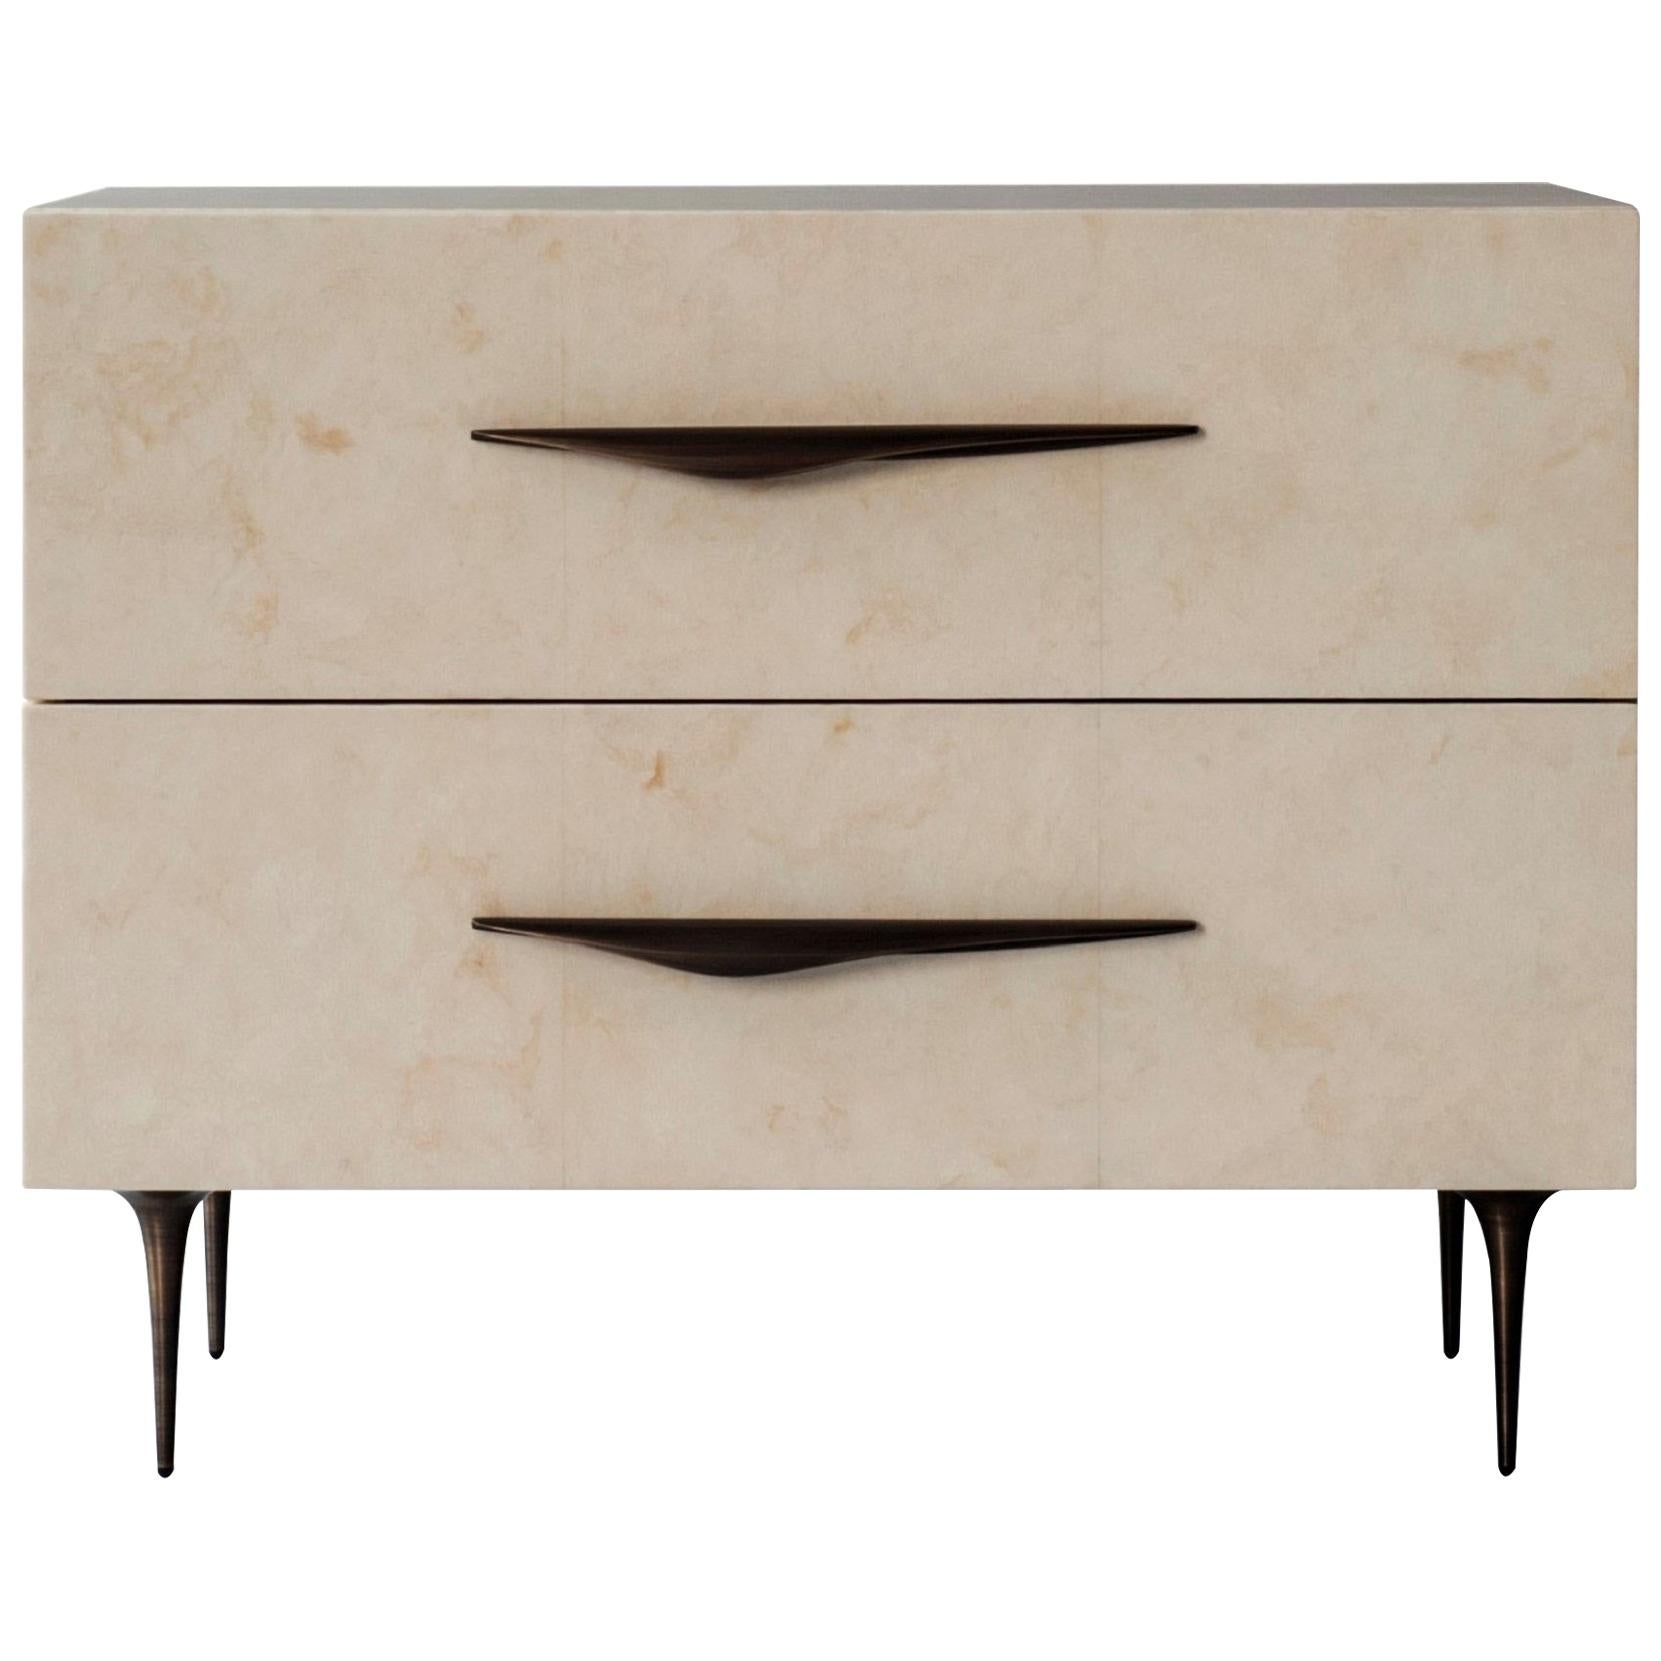 Antwerp Bedside Table by DeMuro Das with Solid Antique Bronze Handles and Legs For Sale